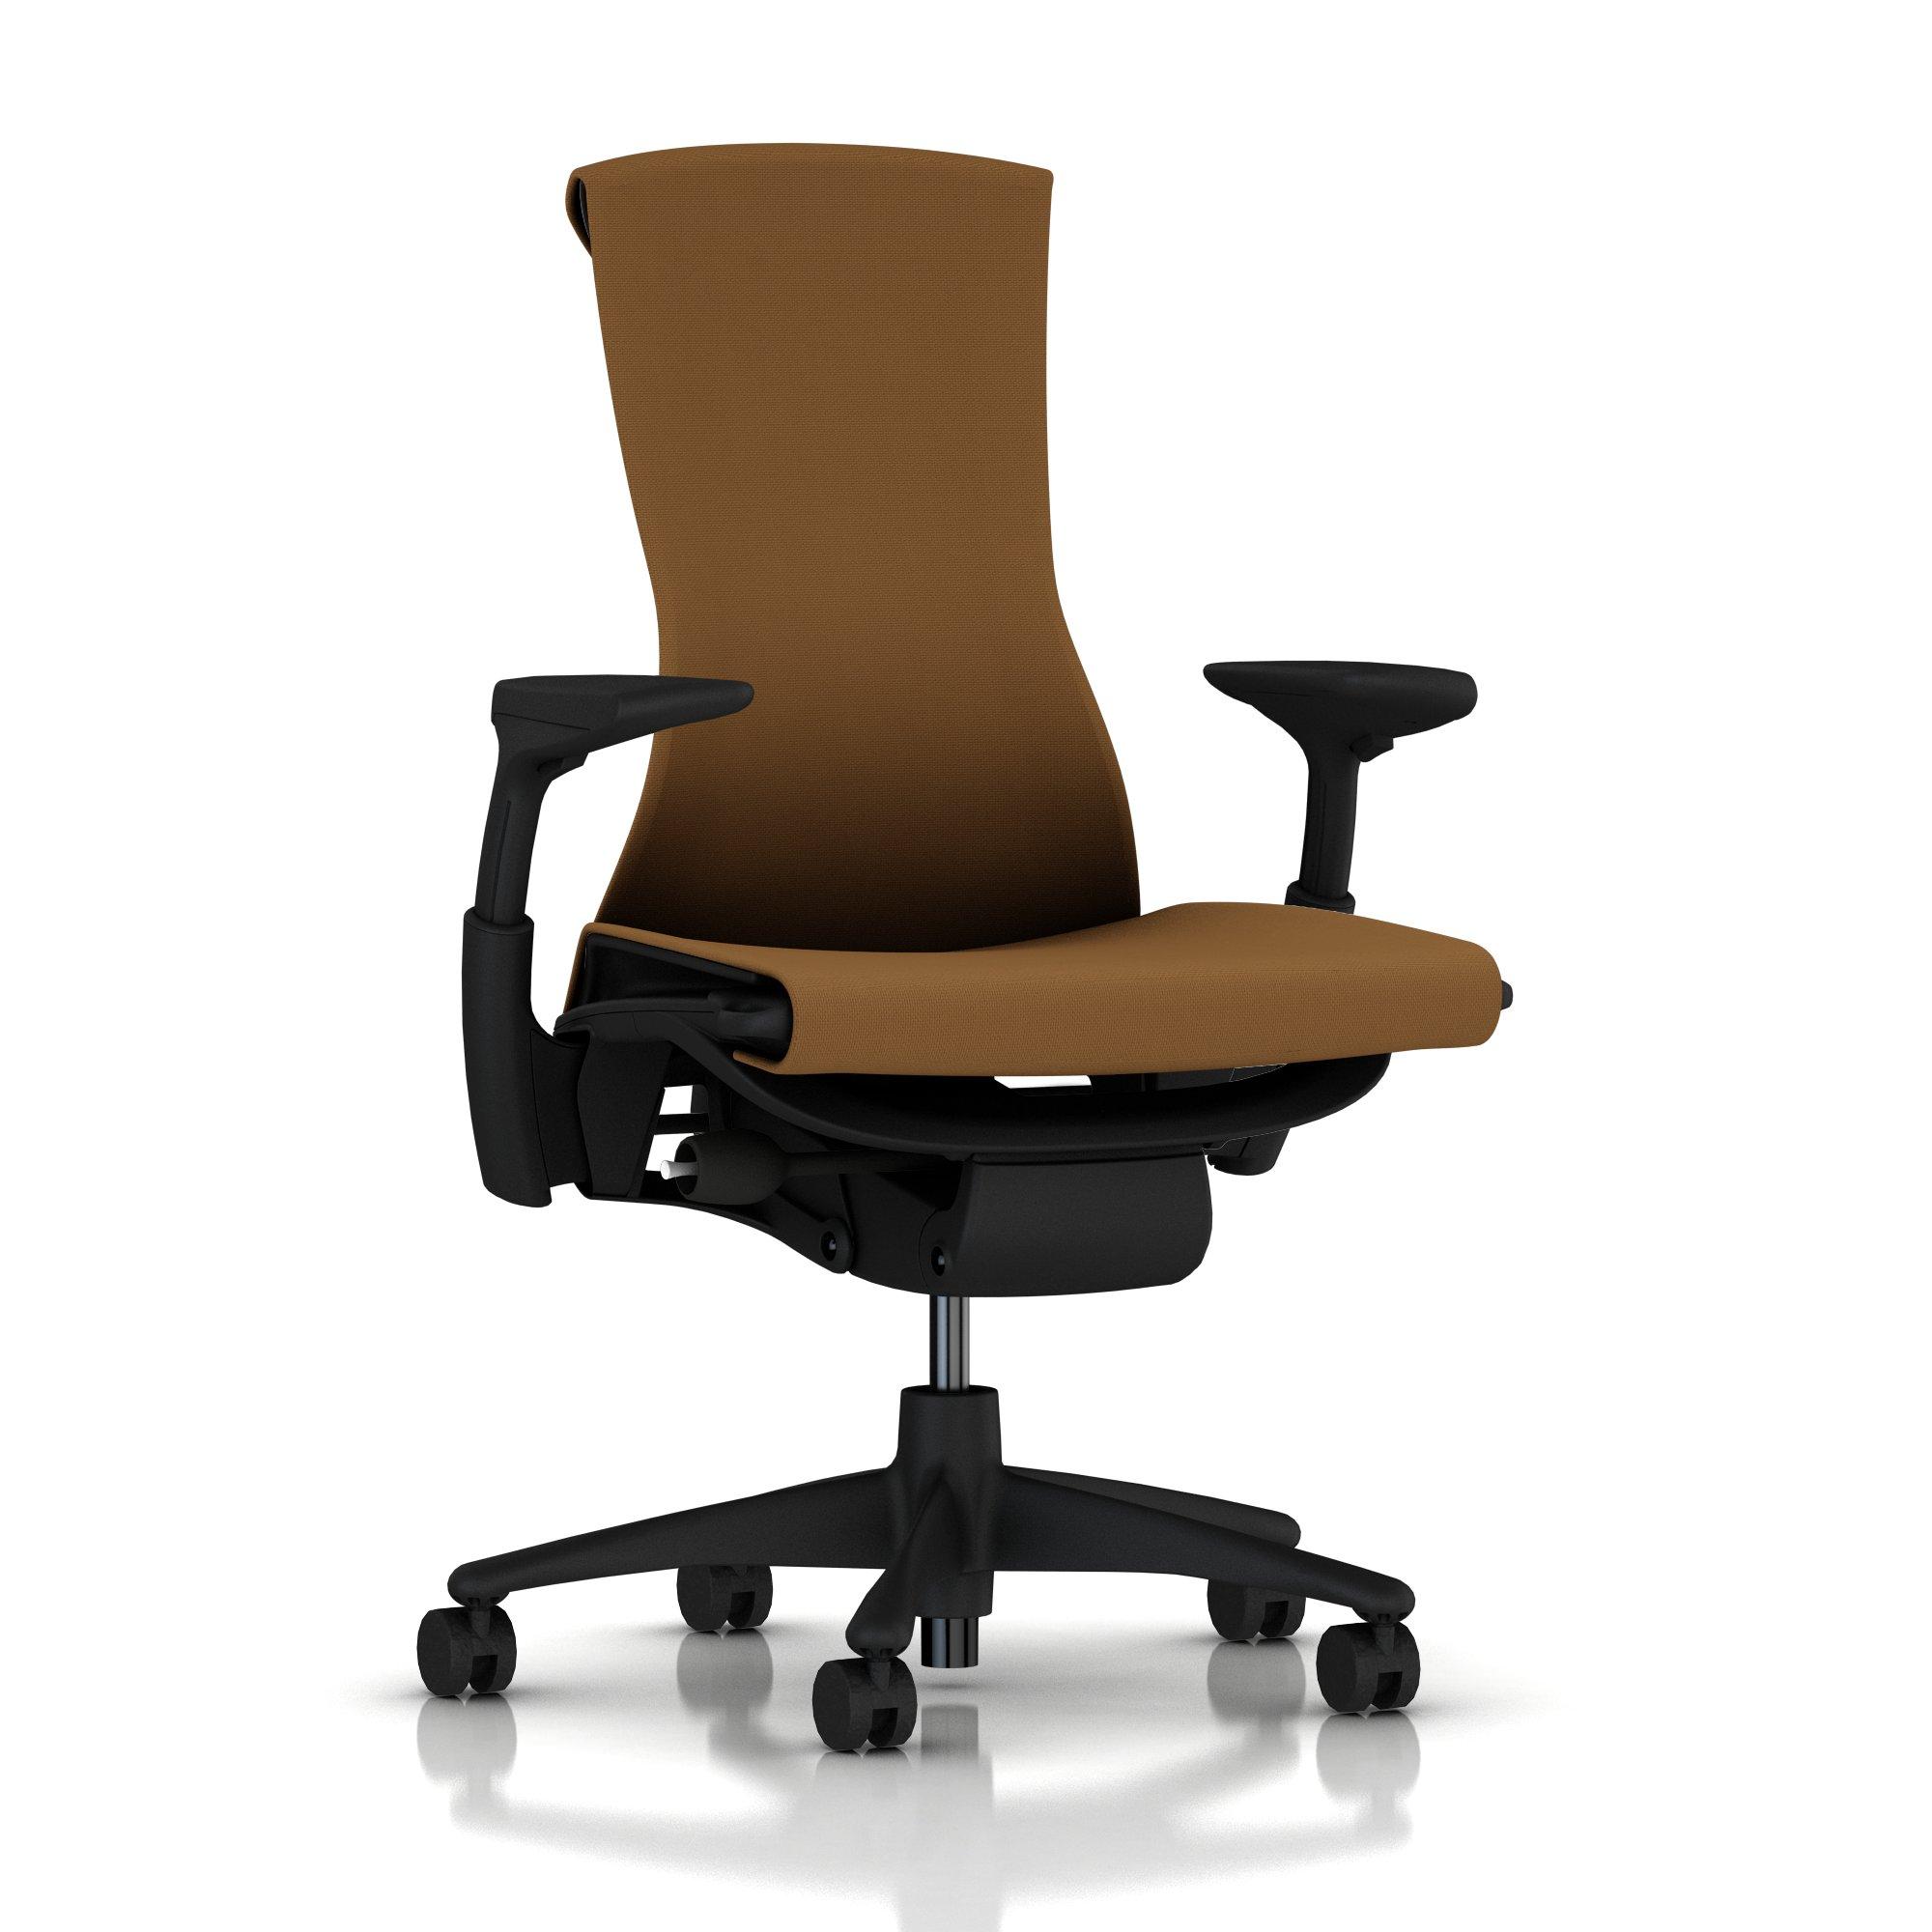 Embody Chair Molasses Rhythm with Graphite Frame by Herman Miller